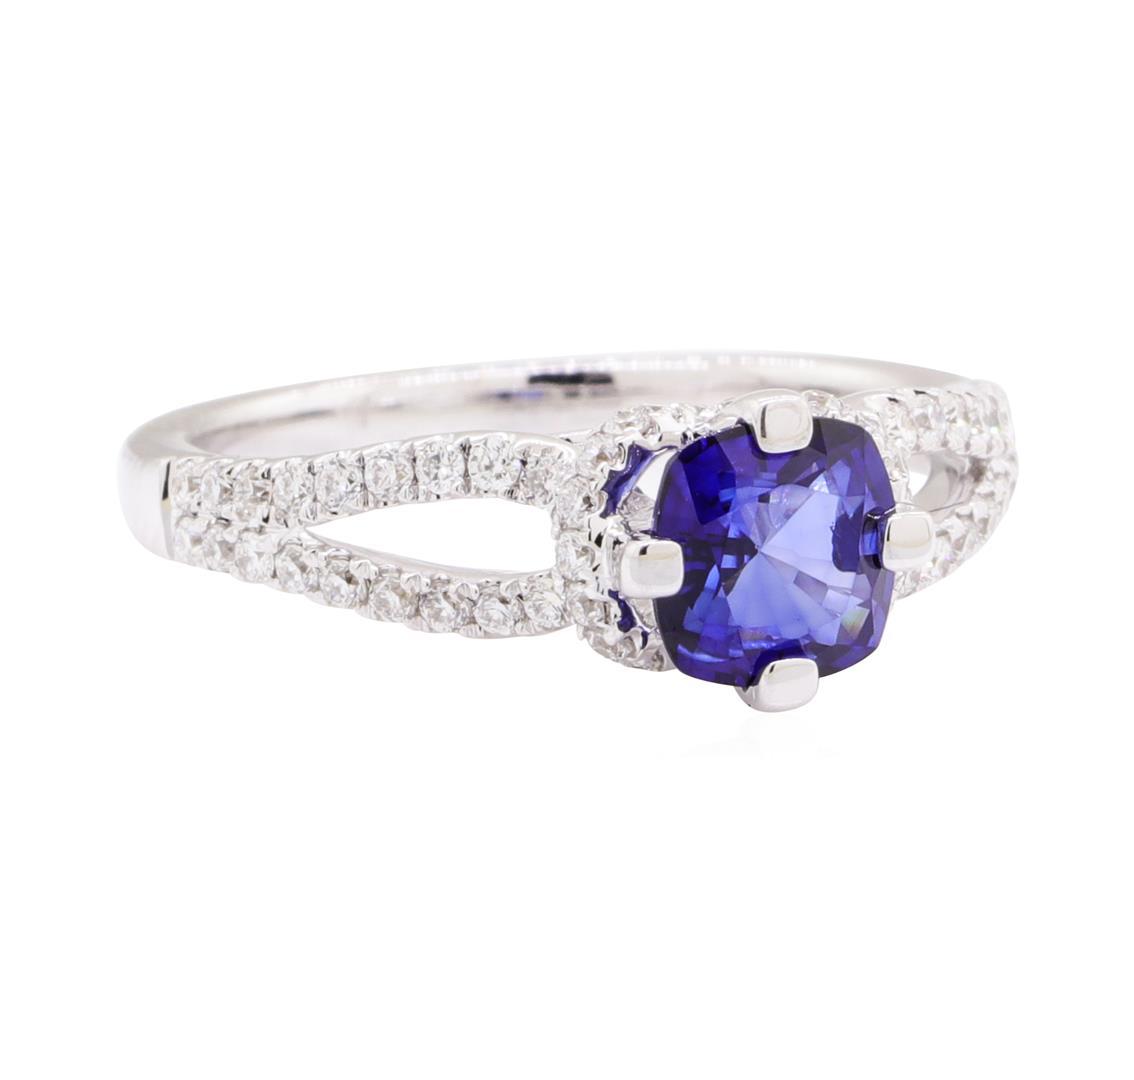 1.42 ctw Sapphire And Diamond Ring - 18KT White Gold